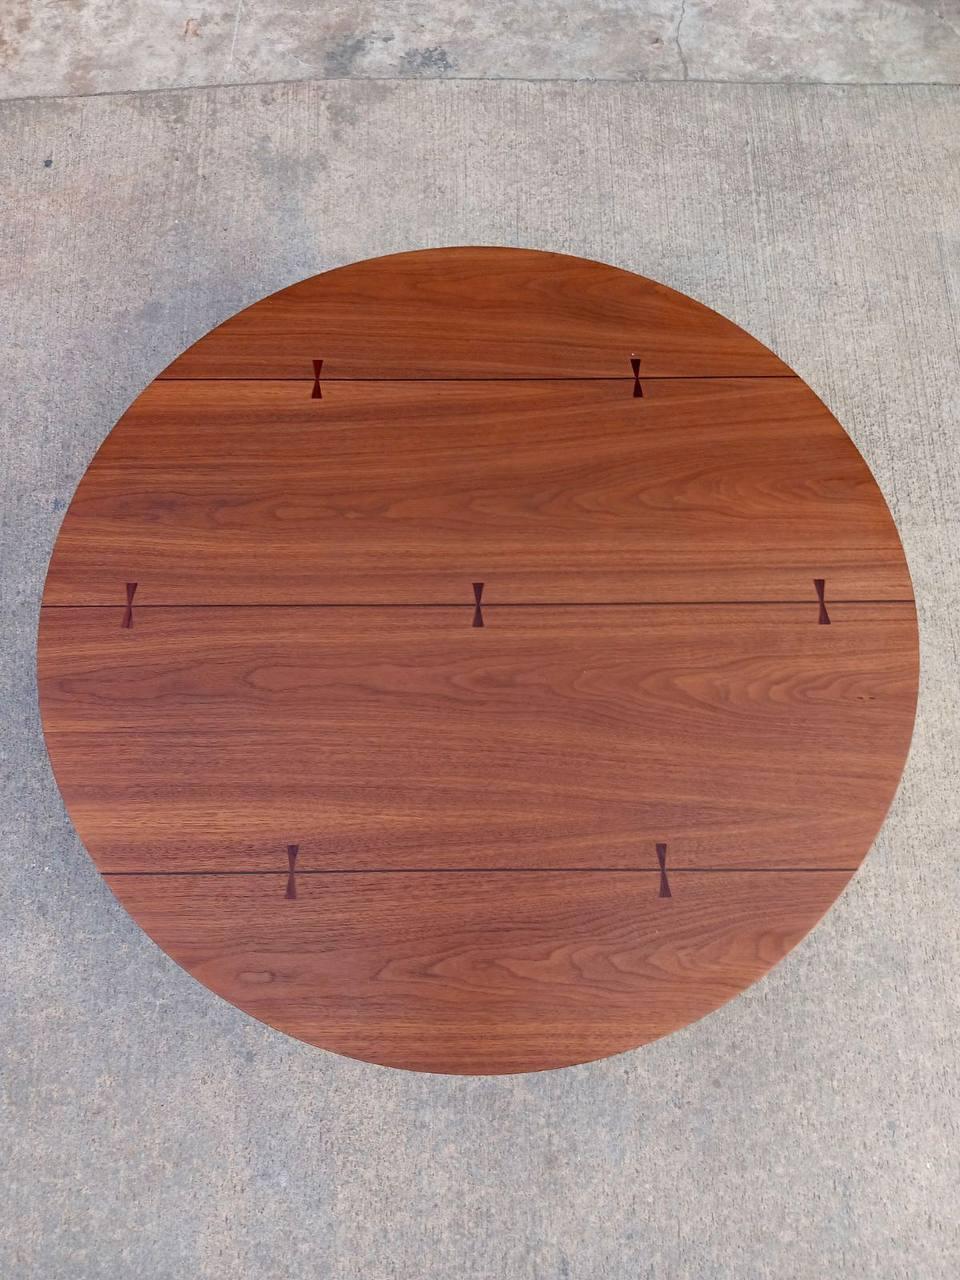 American Newly Refinished -Mid-Century Modern Walnut Coffee Table Inlaid Bowtie Rosewood  For Sale